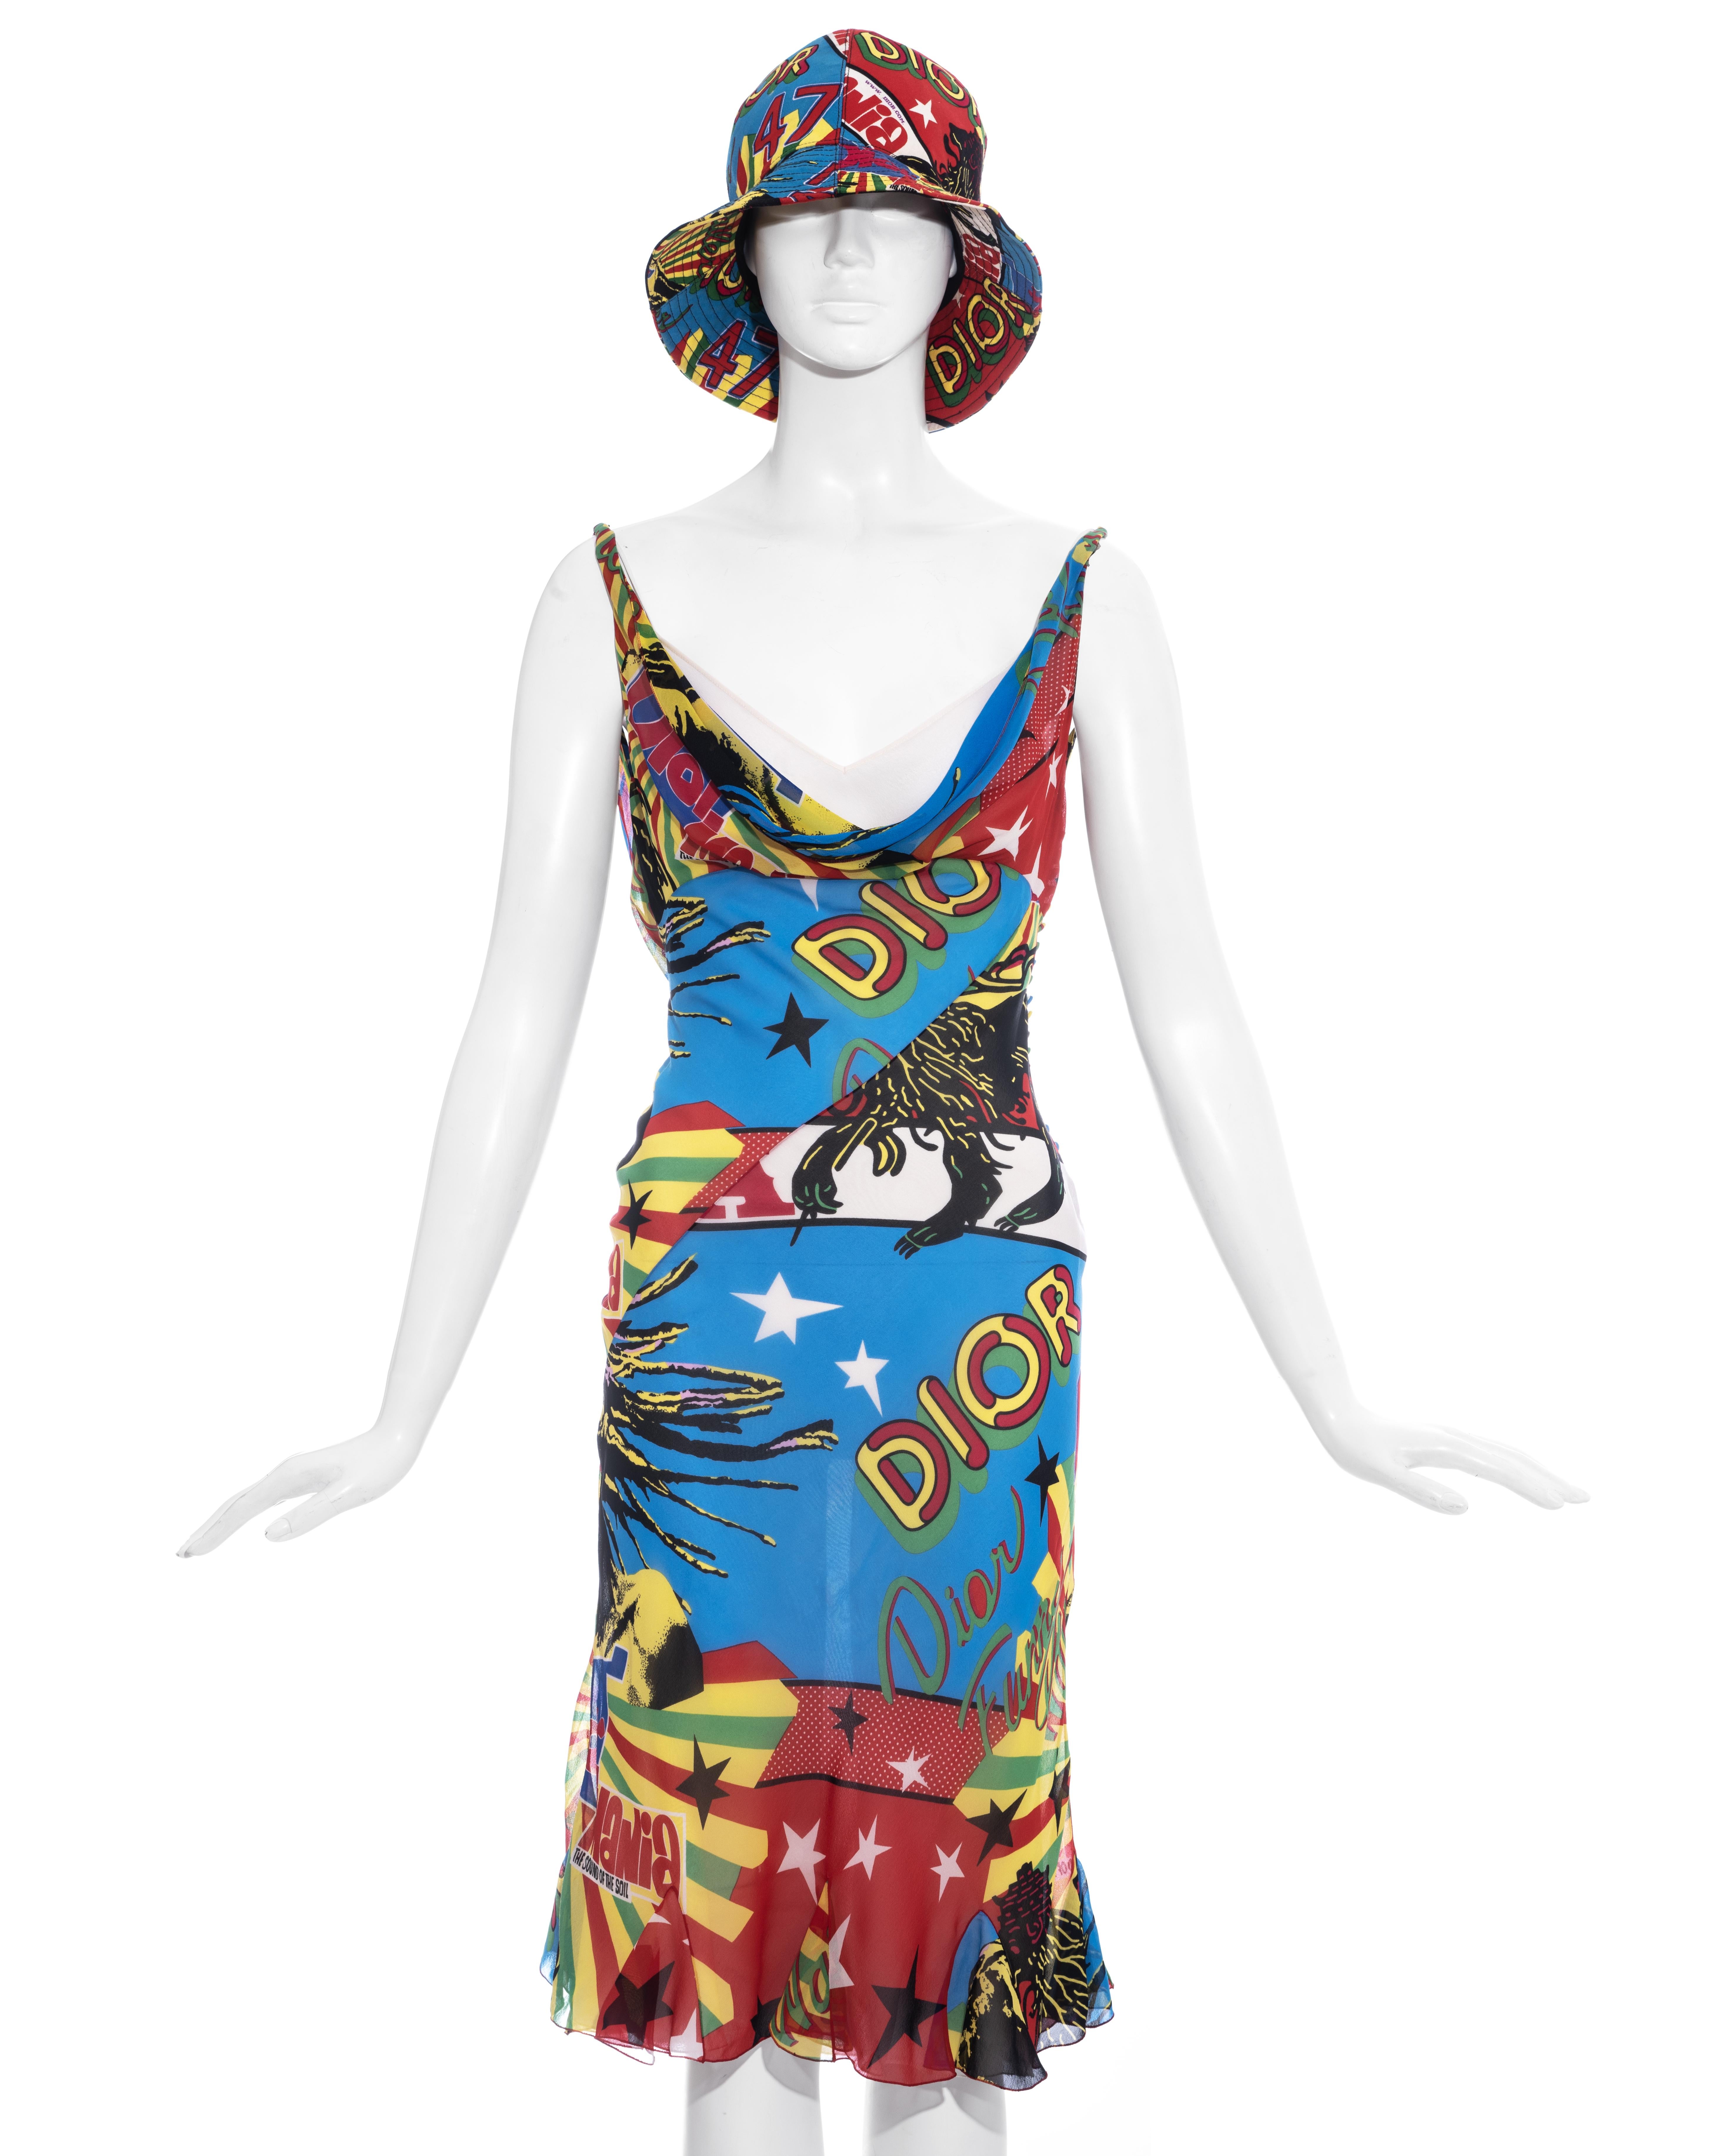 Christian Dior by John Galliano silk chiffon mid-length slip dress and matching bucket hat with signature 'Rasta Mania' print, draped cleavage, open back, fabric button fastenings and attached cream silk slip dress   

Spring-Summer 2004